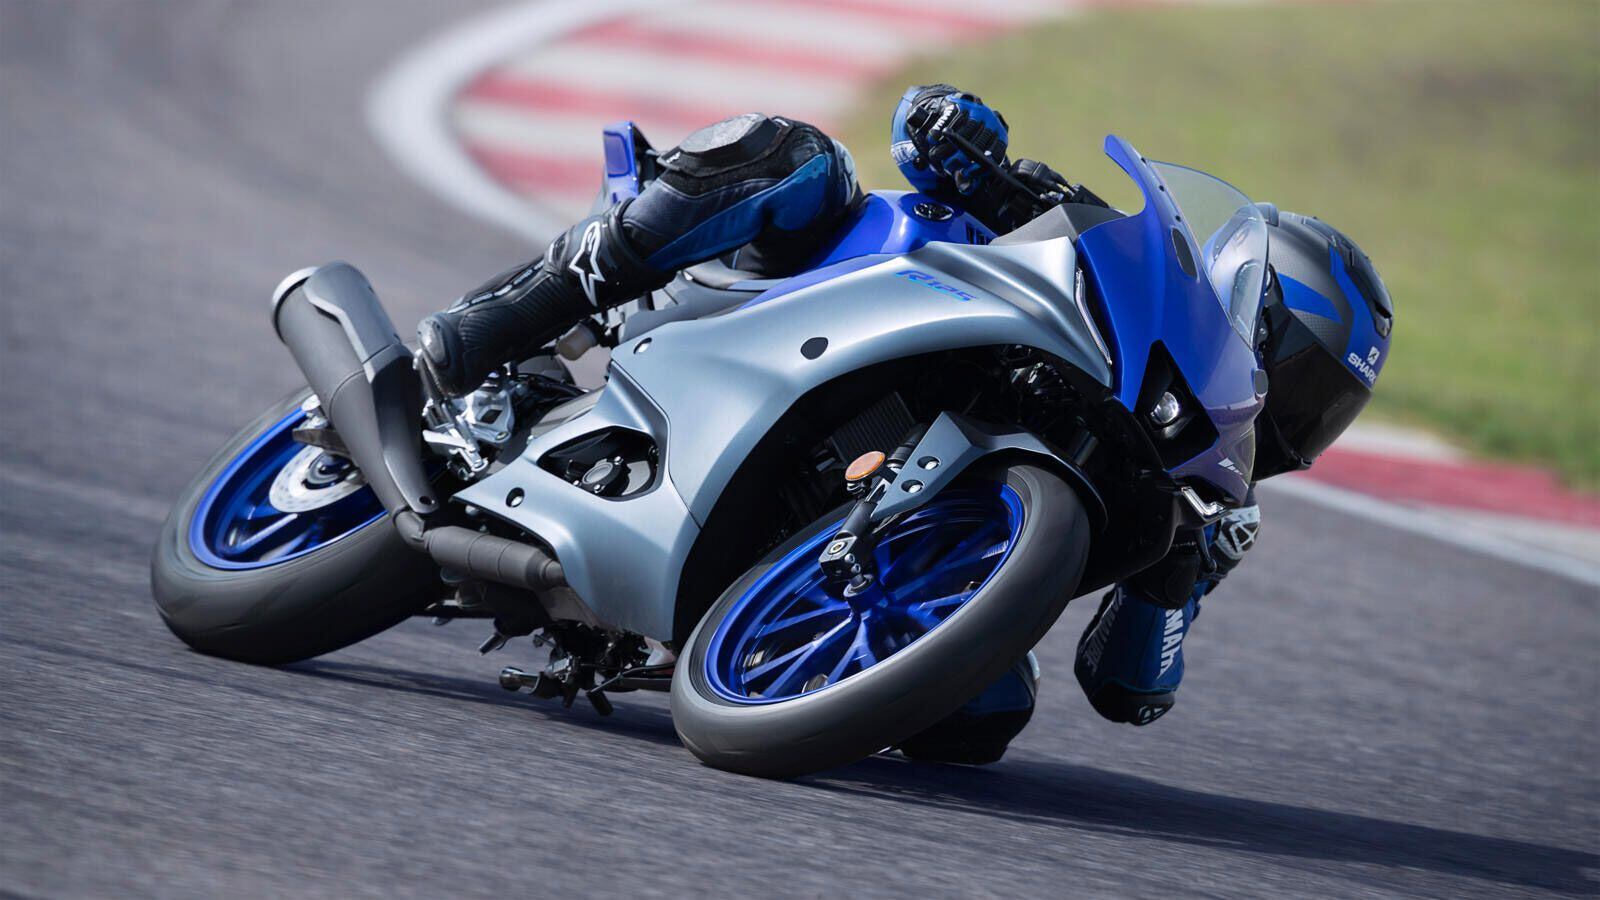 Mind the kickstand; the Yamaha R125 gets low on track day.